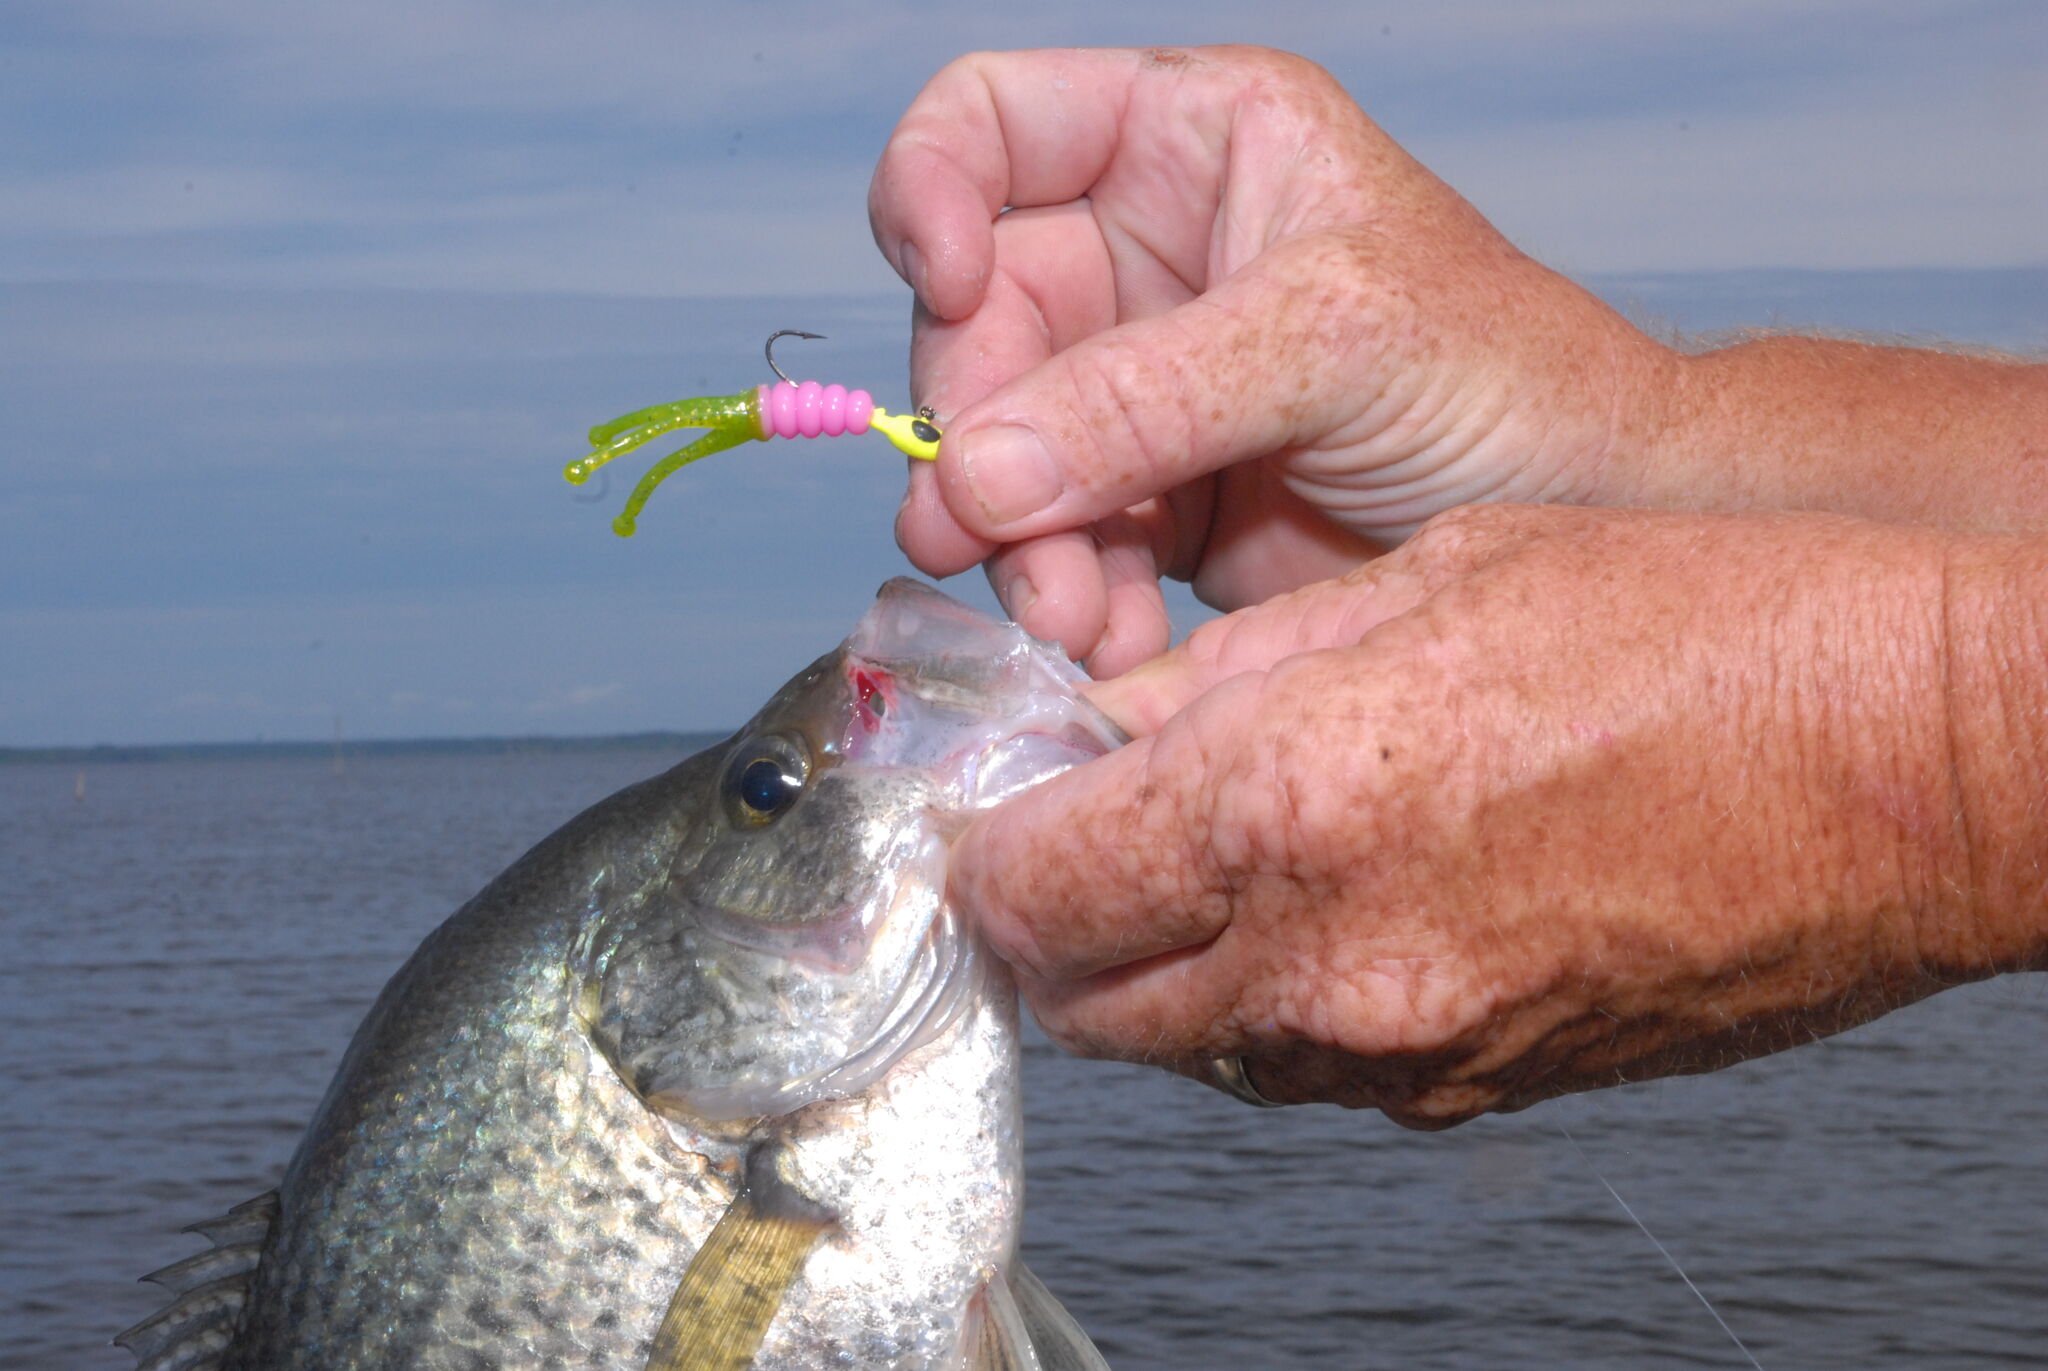 Veteran Texas fishing guide offers tips for catching fall crappie